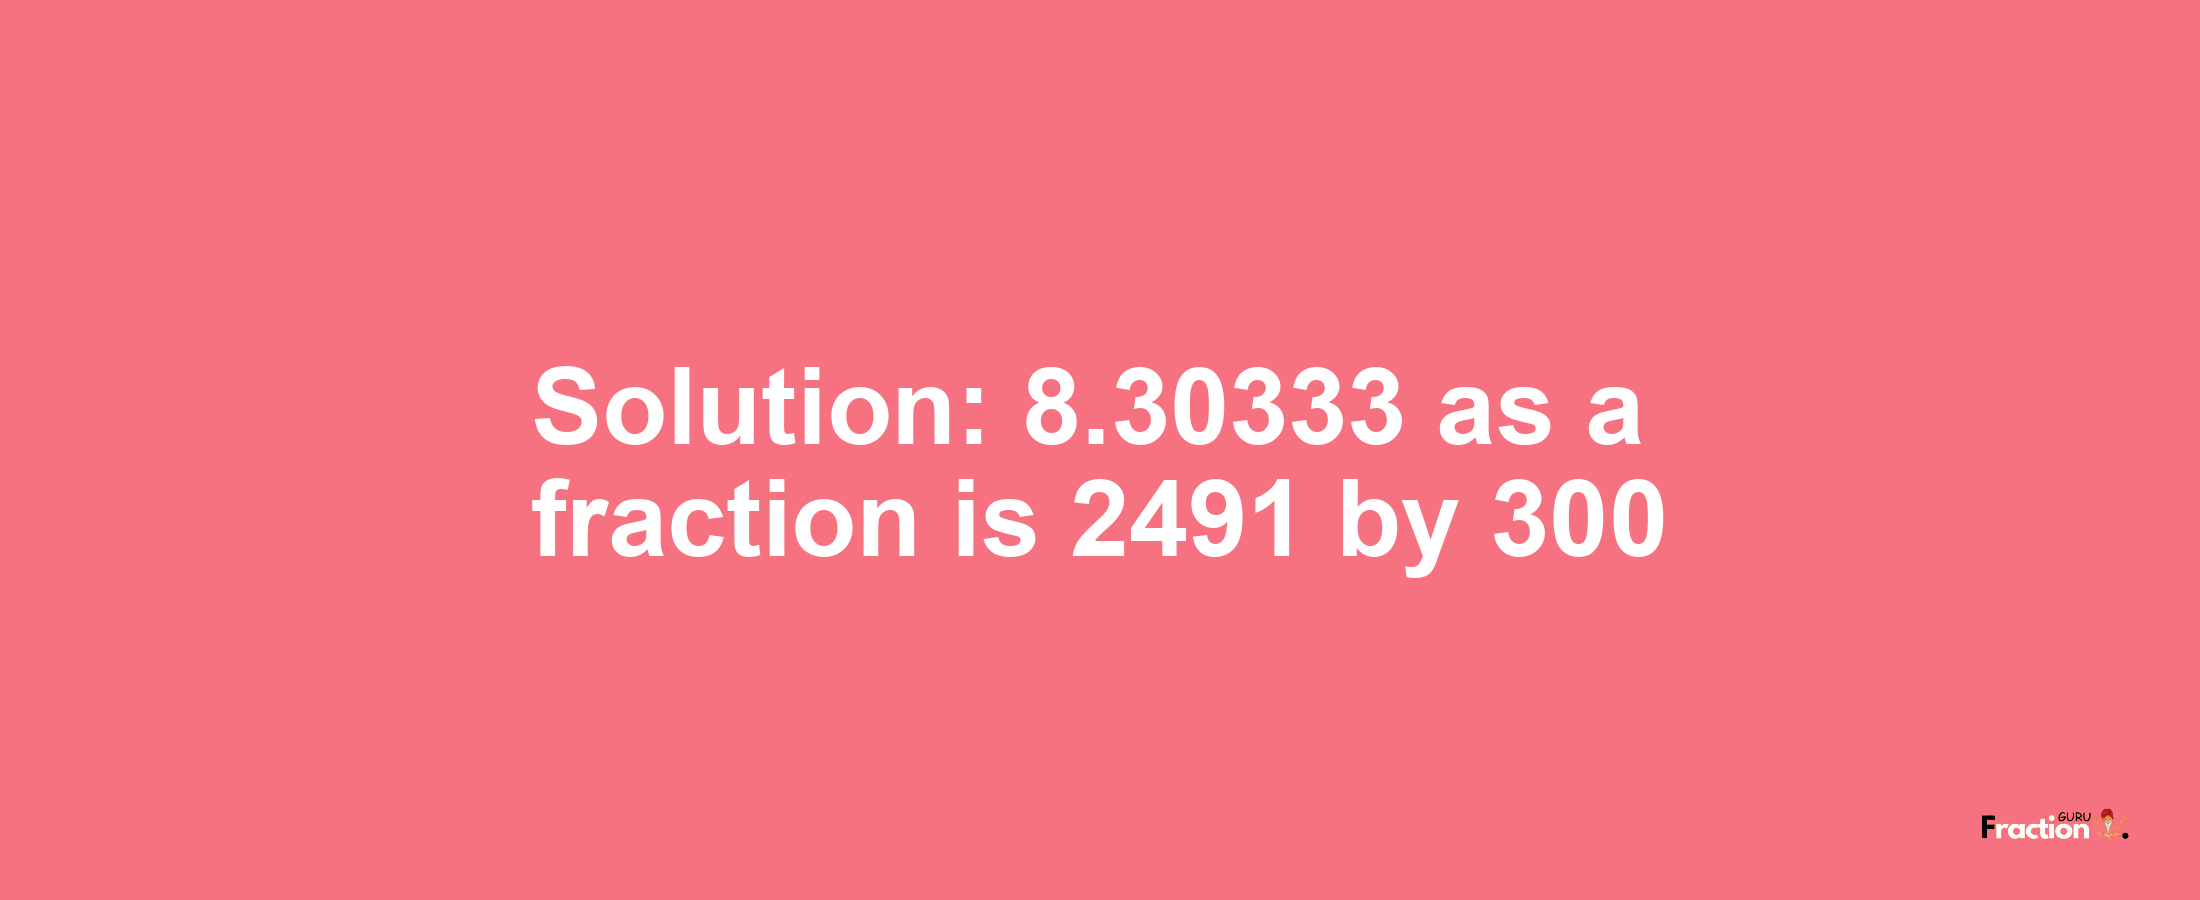 Solution:8.30333 as a fraction is 2491/300